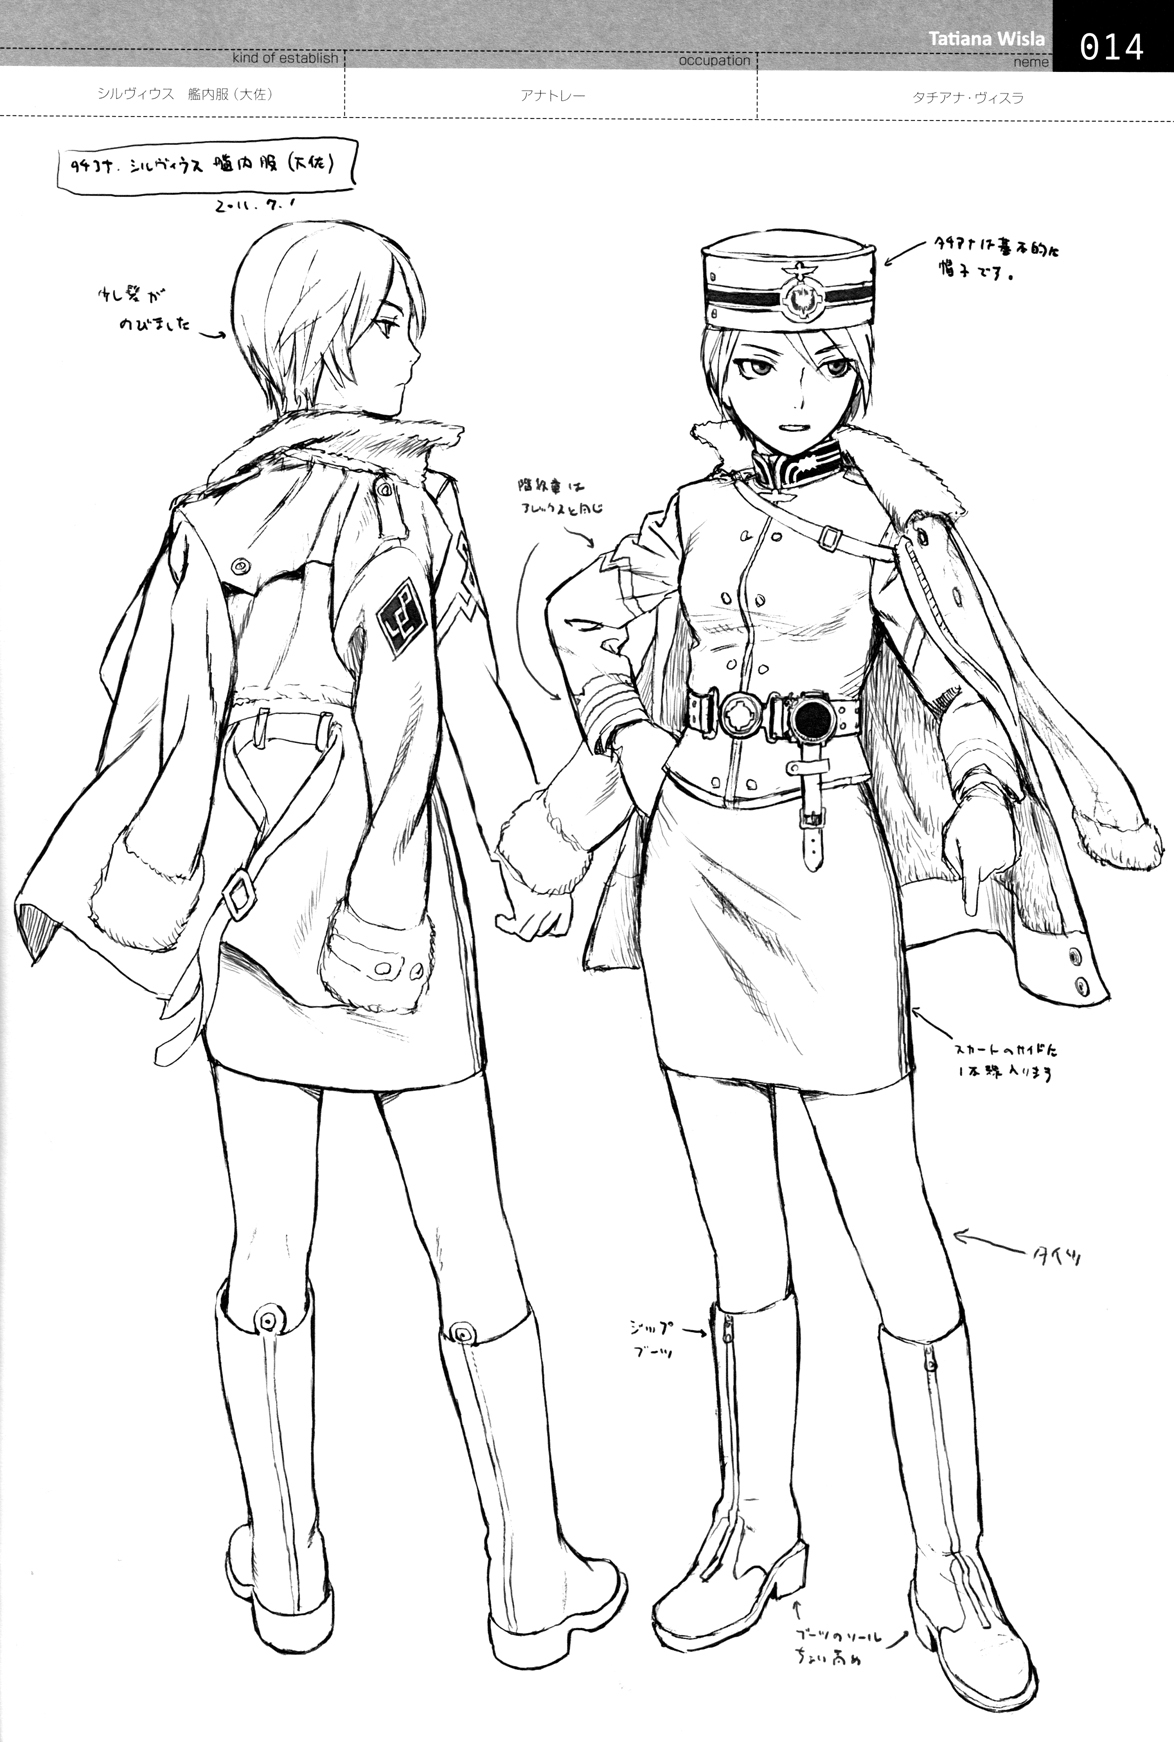 [Pasta's Estab (Range Murata)] Linkage - Last Exile ~ Fam, The Silver Wing - Character Filegraphy 02 11